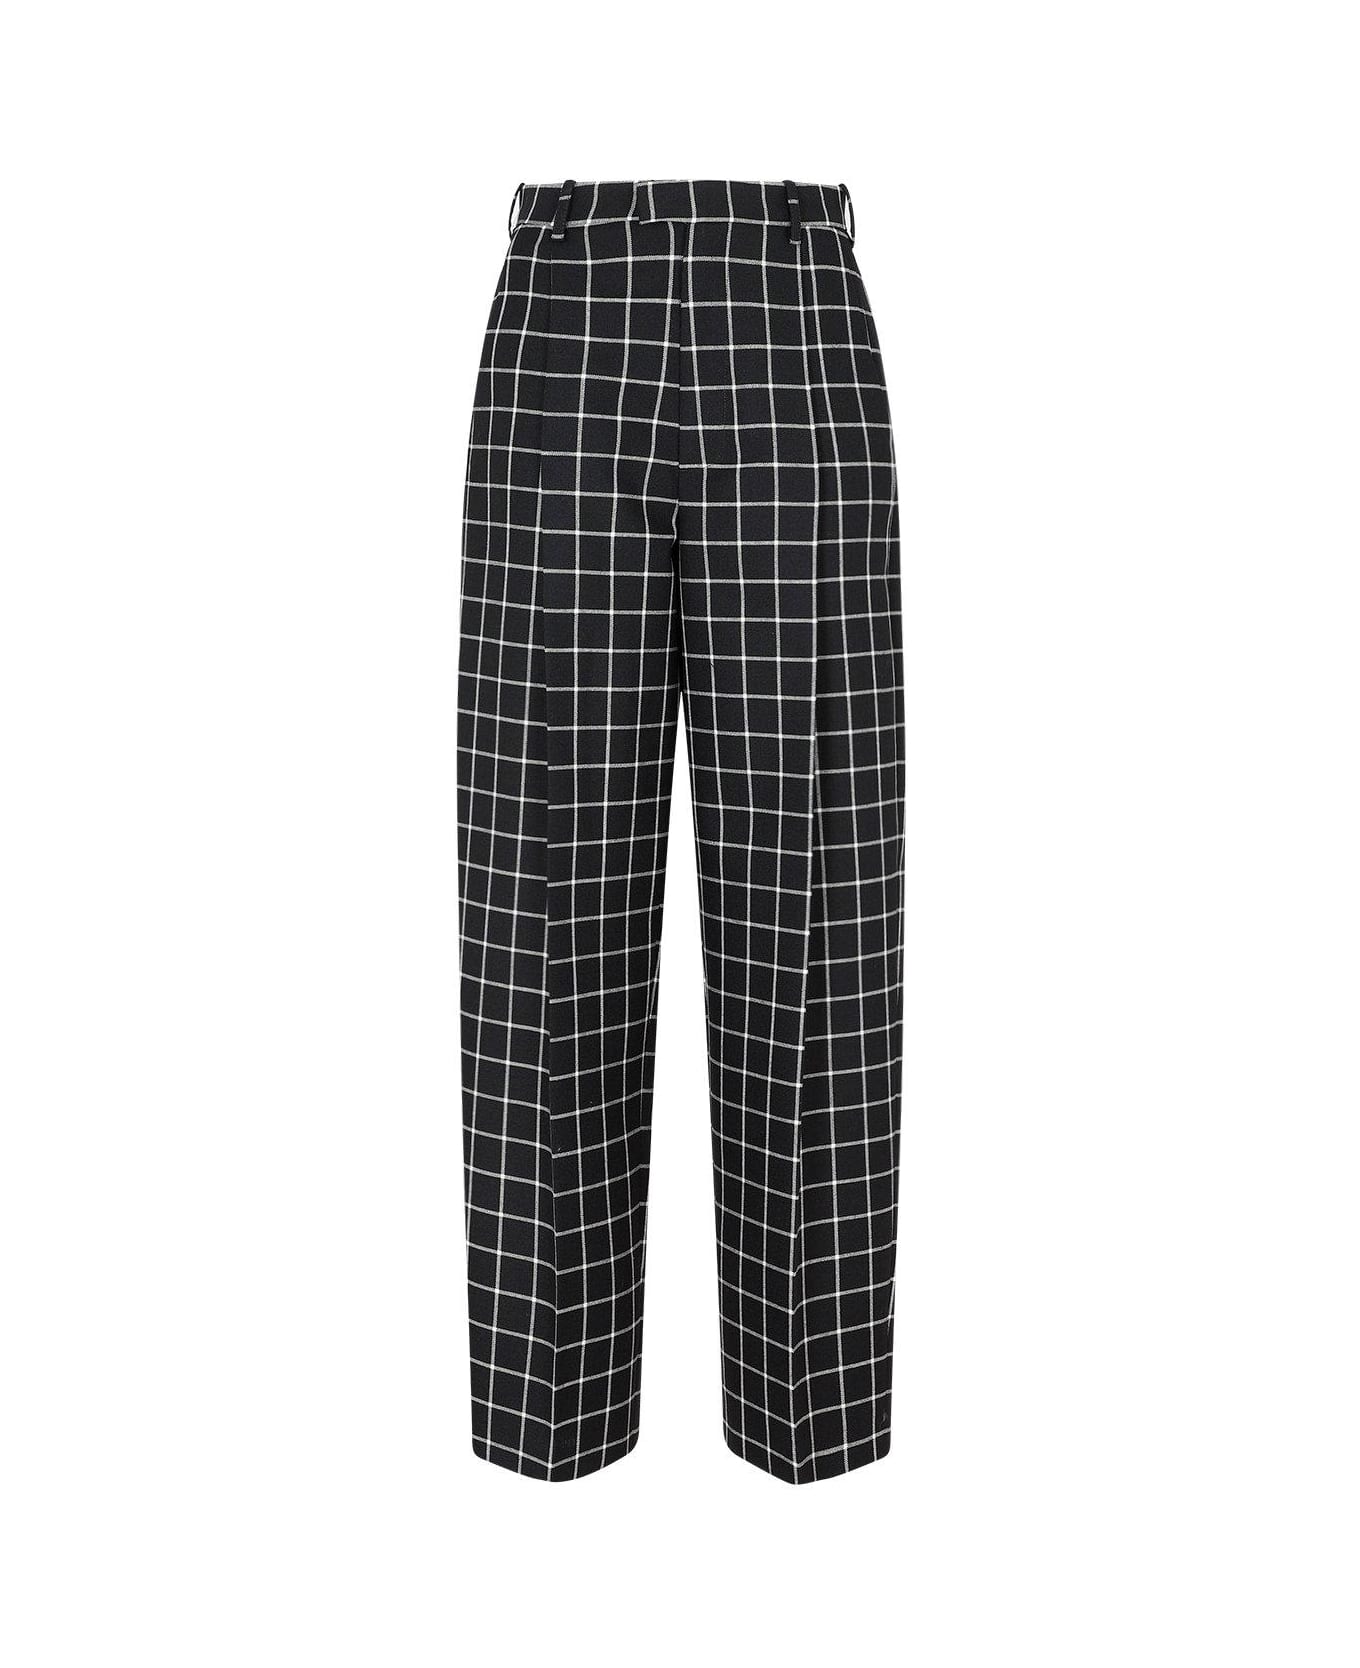 Marni Check Patterned Trousers - black